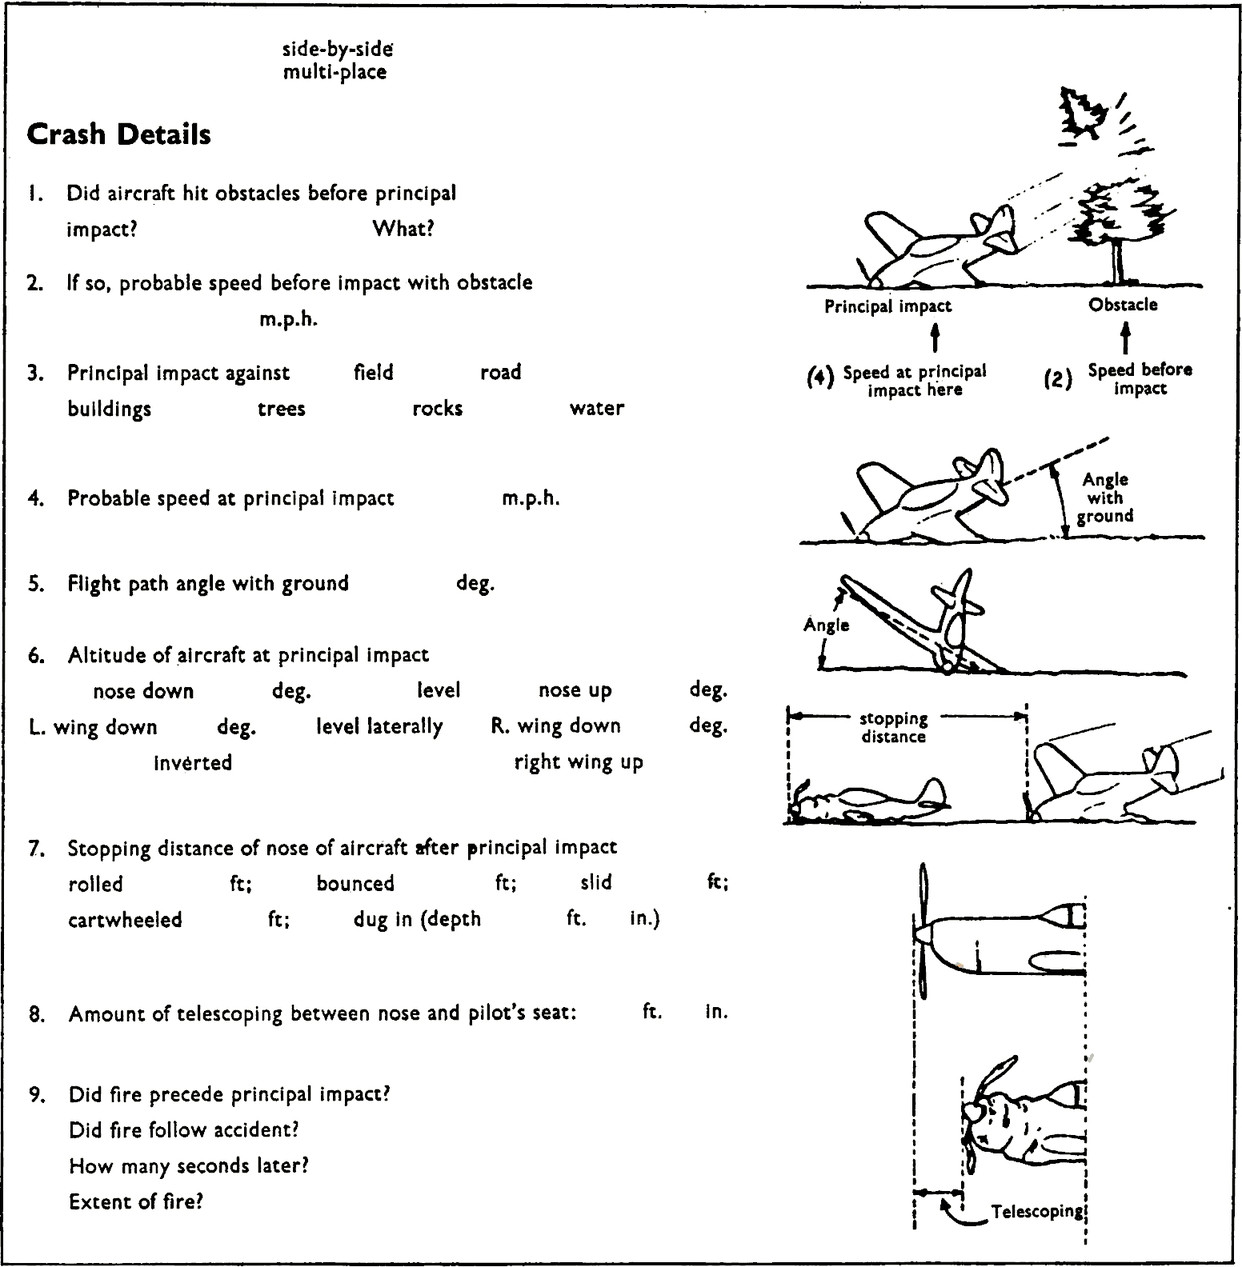 Crash Details form with a series of questions.
1 Did aircraft hit obstacles before principal. Fields read “impact?” and “What?”.
2 If so, probable speed before impact with obstacle, field reads “m.p.h.”.
3 Principal impact against, field to circle read: “field, road, buildings, trees, rocks, water”.
4 Probable speed at principal impact, field reads “m.p.h.”.
5 Flight path angle with ground, field reads “deg.”.
6 Altitude of aircraft at principal,
fields read “impact, nose down deg., level nose up deg., L. wing down deg., level laterally, R. wing down deg., inverted, right wing up,”.
7 Stopping distance of nose of aircraft after principal impact,
fields read “rolled ft;, bounced ft;, slid ft;, cartwheeled ft;, dug in (depth ft. in.)”.
8 Amount of telescoping between nose and pilot’s seat, field reads “fe. in.”.
9 Did fire precede principal impact?
Did fire follow accident?
How many seconds later?
Extent of fire?
Diagrams next to questions include:
a small cartoon plane crashing through a tree.
plane at an angle of the ground to show to measure the angle from the bottom of the plane towards the ground.
angle from the wingspan to the ground.
the stopping distance for a plane once it has crashed.
the nose of a plane with it crumpled to show telescoping.